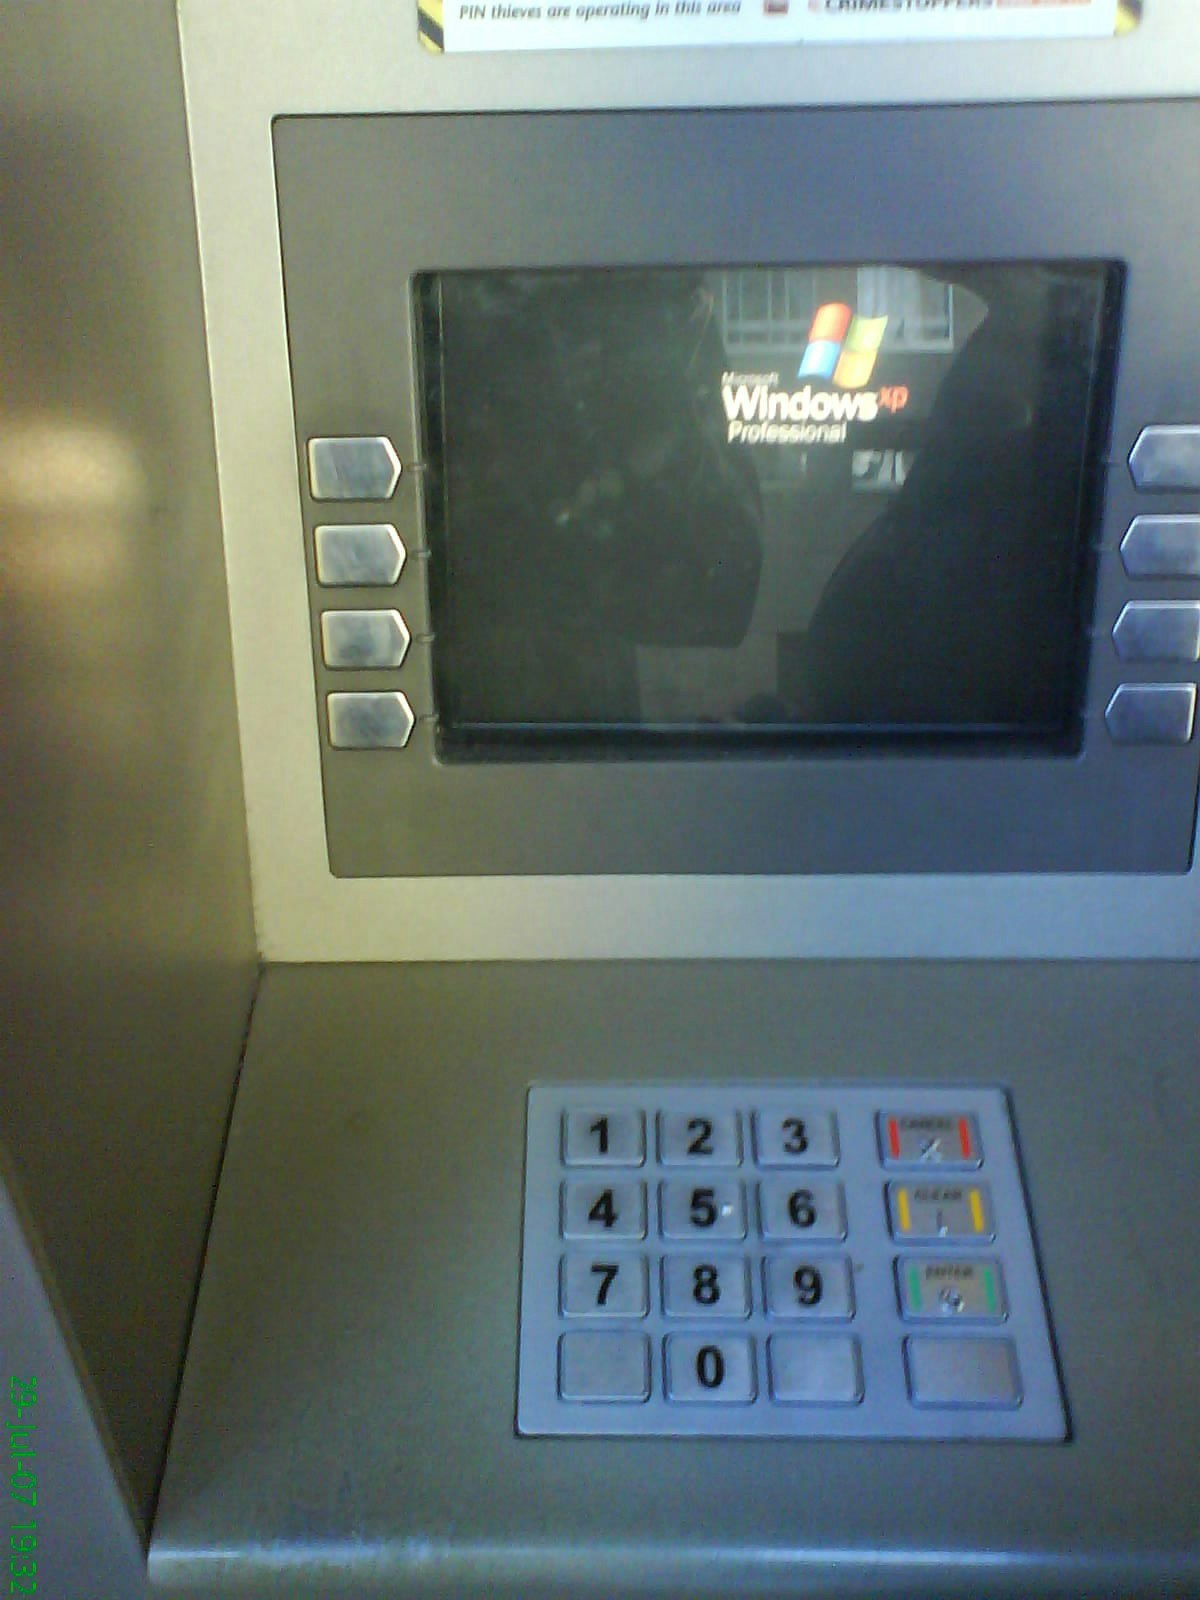 featured image - Do ATMs running Windows XP pose a security risk? You can bank on it!